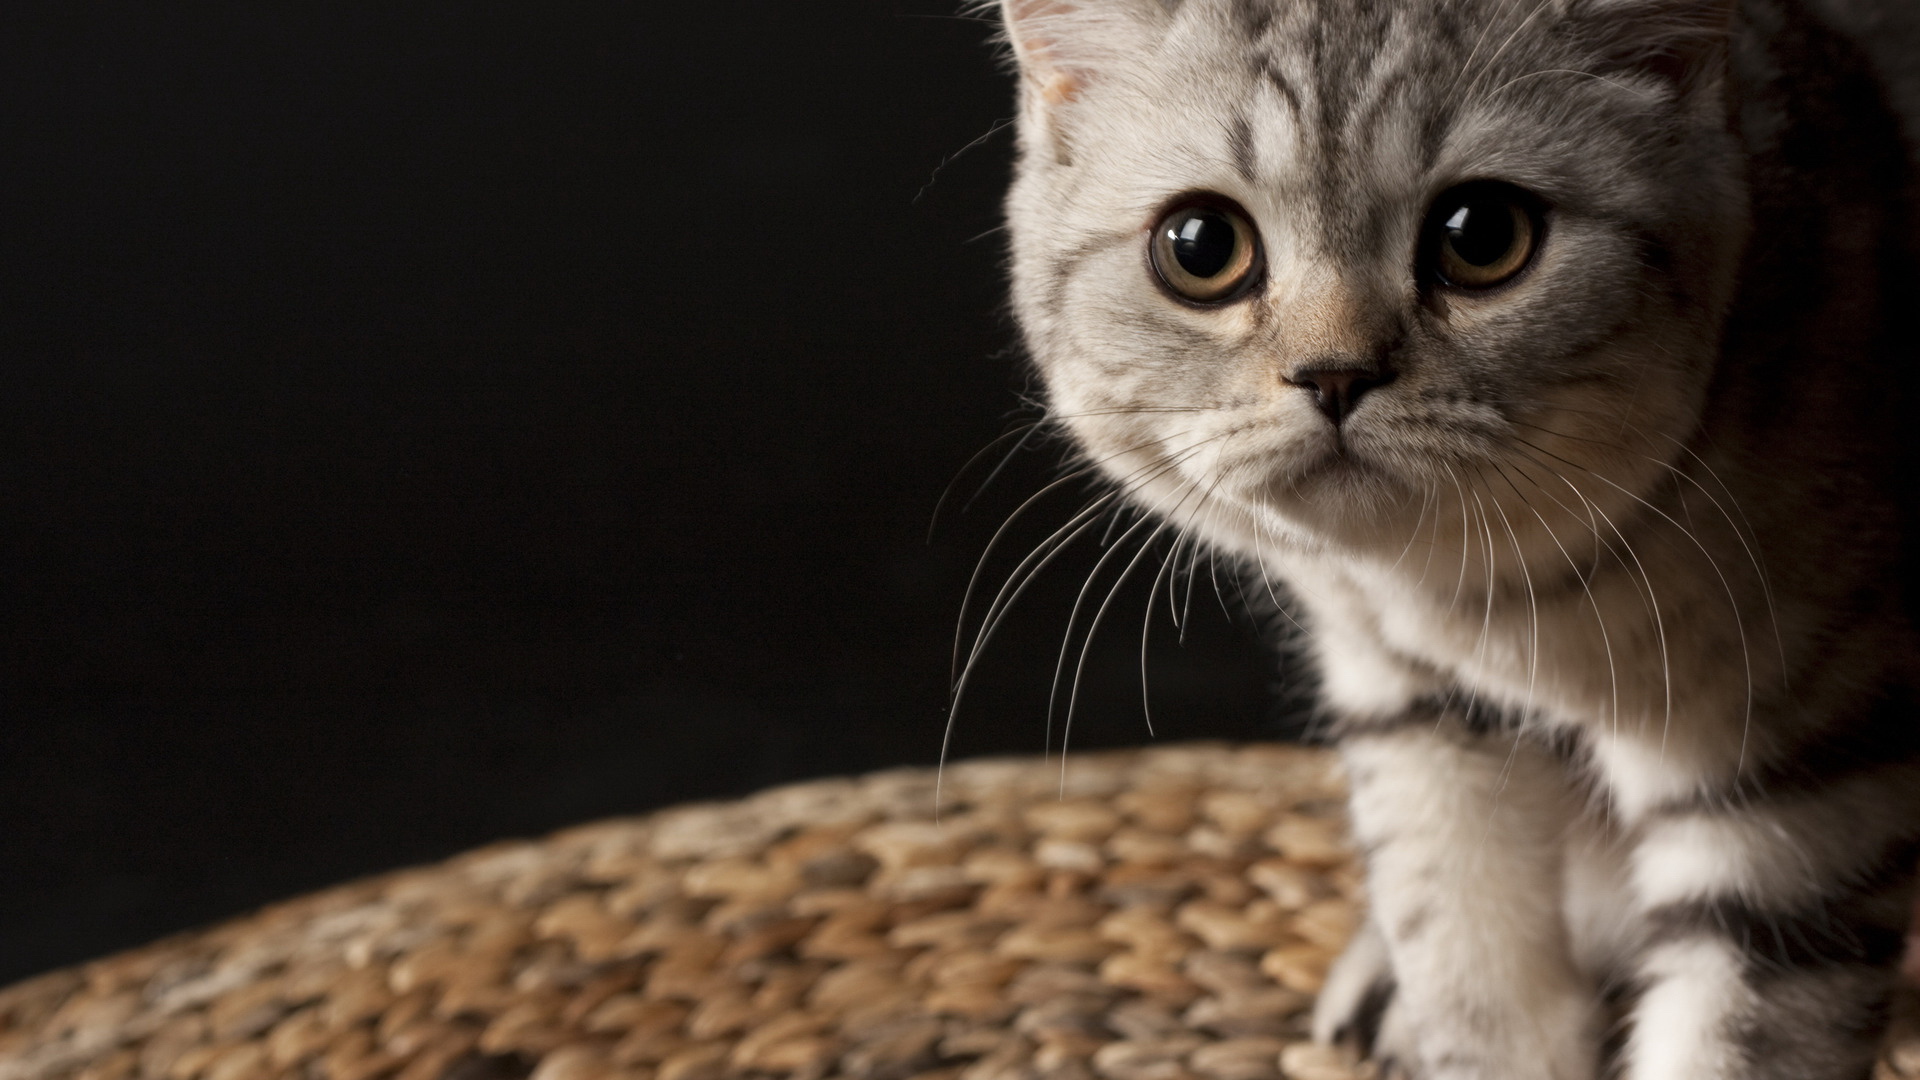 40+] Cat Wallpapers HD 1920x1080 on ...